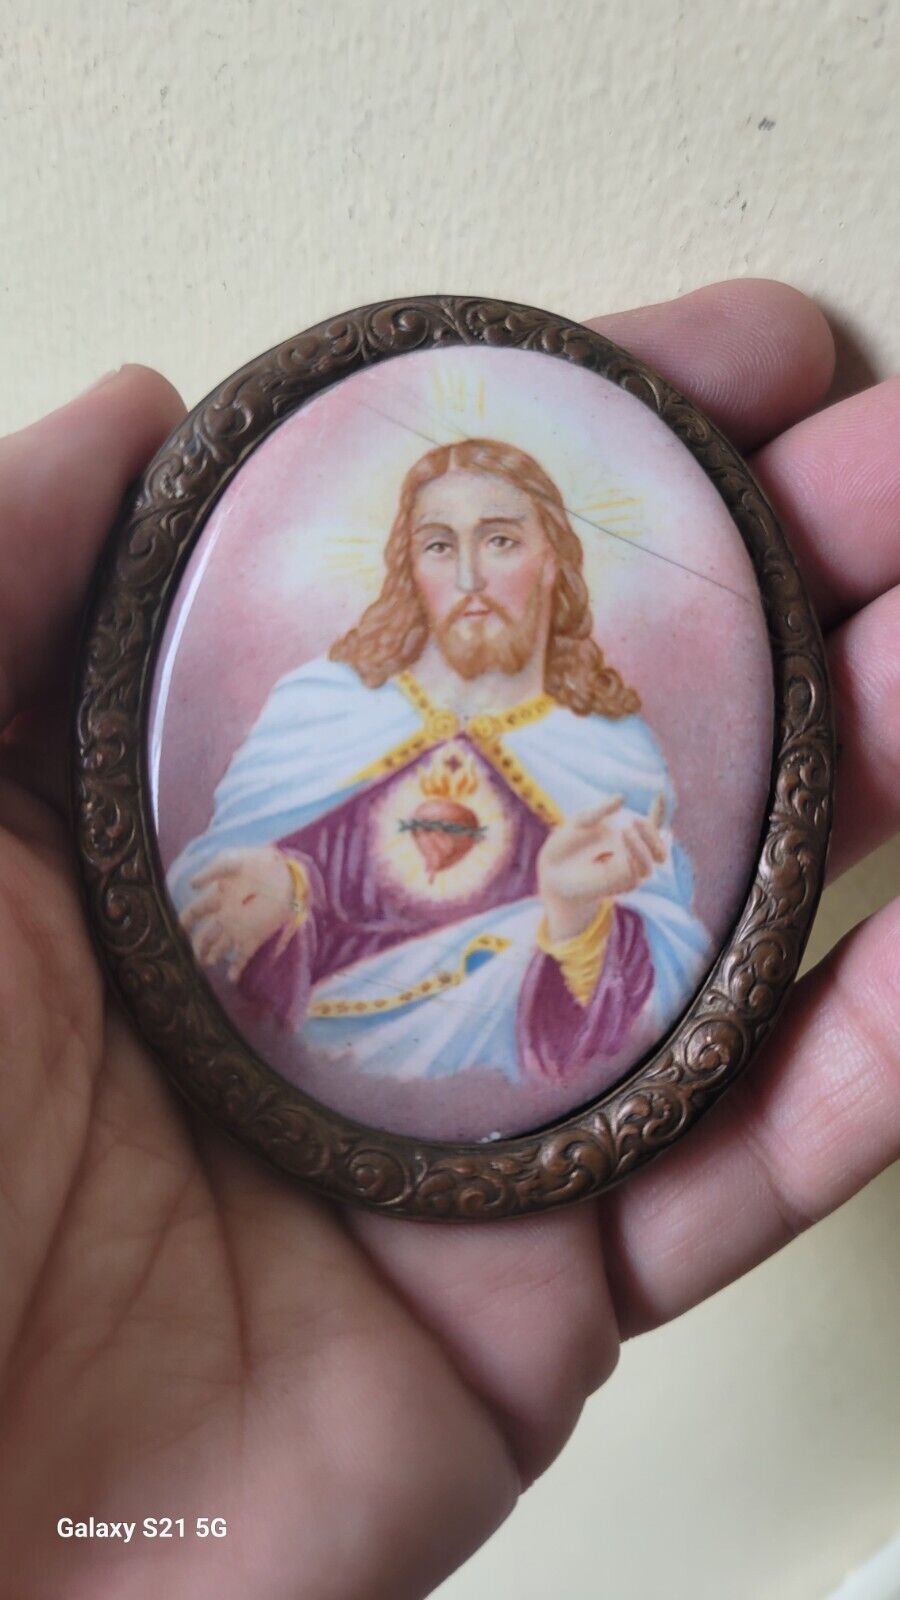 Antique Hand Painted Enameled Miniature Painting of Jesus Christ c1810